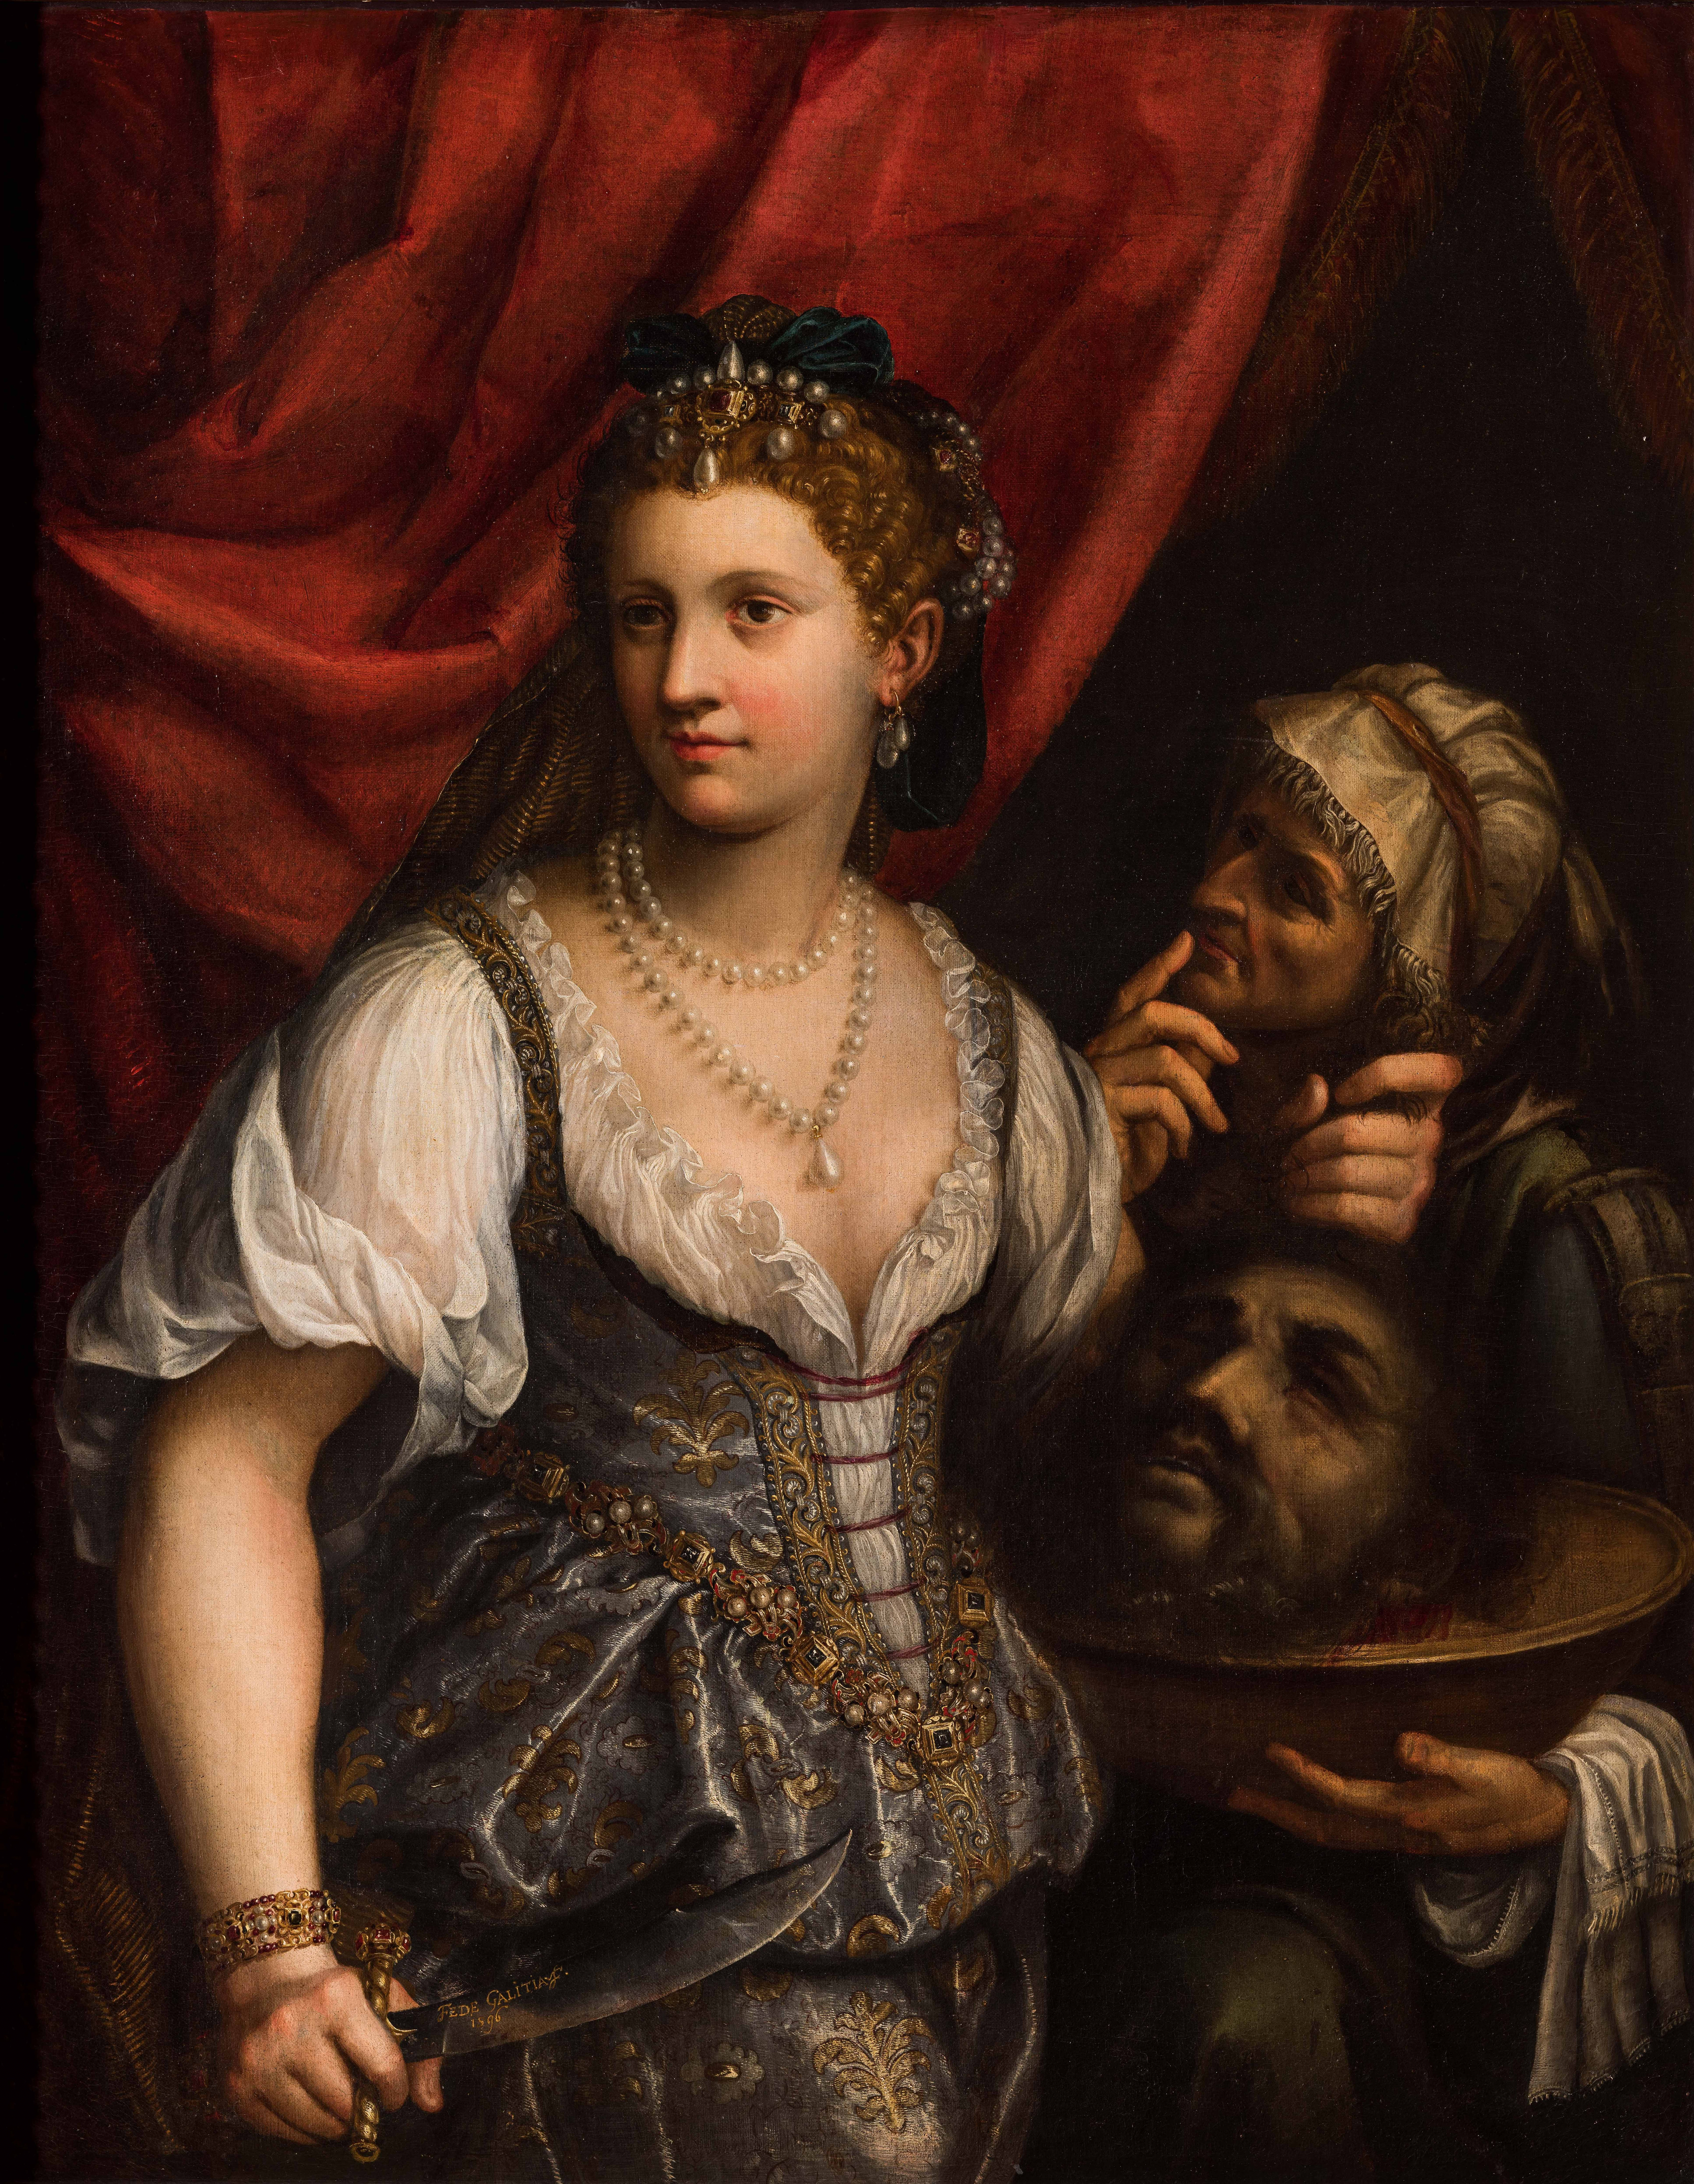 Fede Galizia (Italian, 1578–1640), "Judith with the Head of Holofernes," 1596, Oil on canvas. The John and Mable Ringling Museum of Art, Gift of Mr. and Mrs. Jacob Polak, 1969, SN684